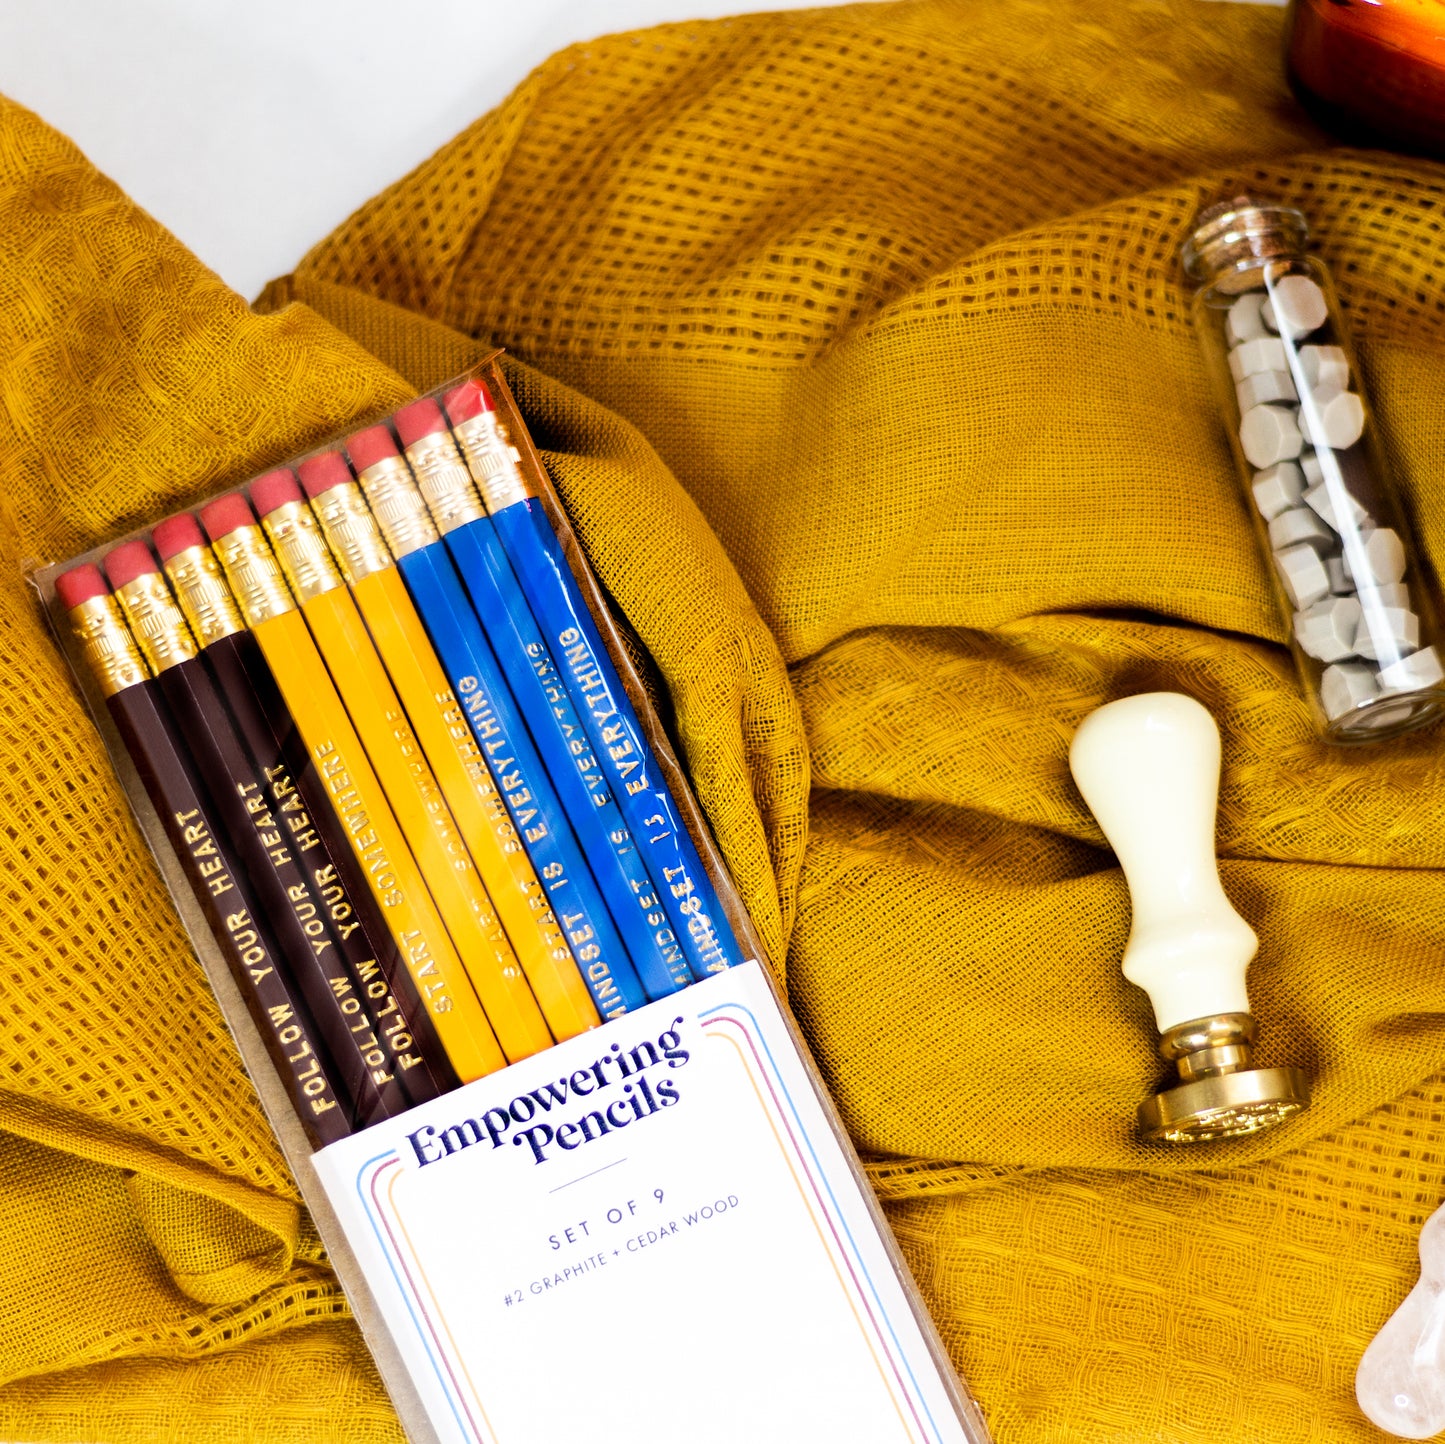 Set of 9 foil engraved pencils in the colors yellow, dark red, and bright blue. Each pencil has a unique quote on the pencil, "Start Somewhere" "Follow Your Heart" "Mindset is Everything"